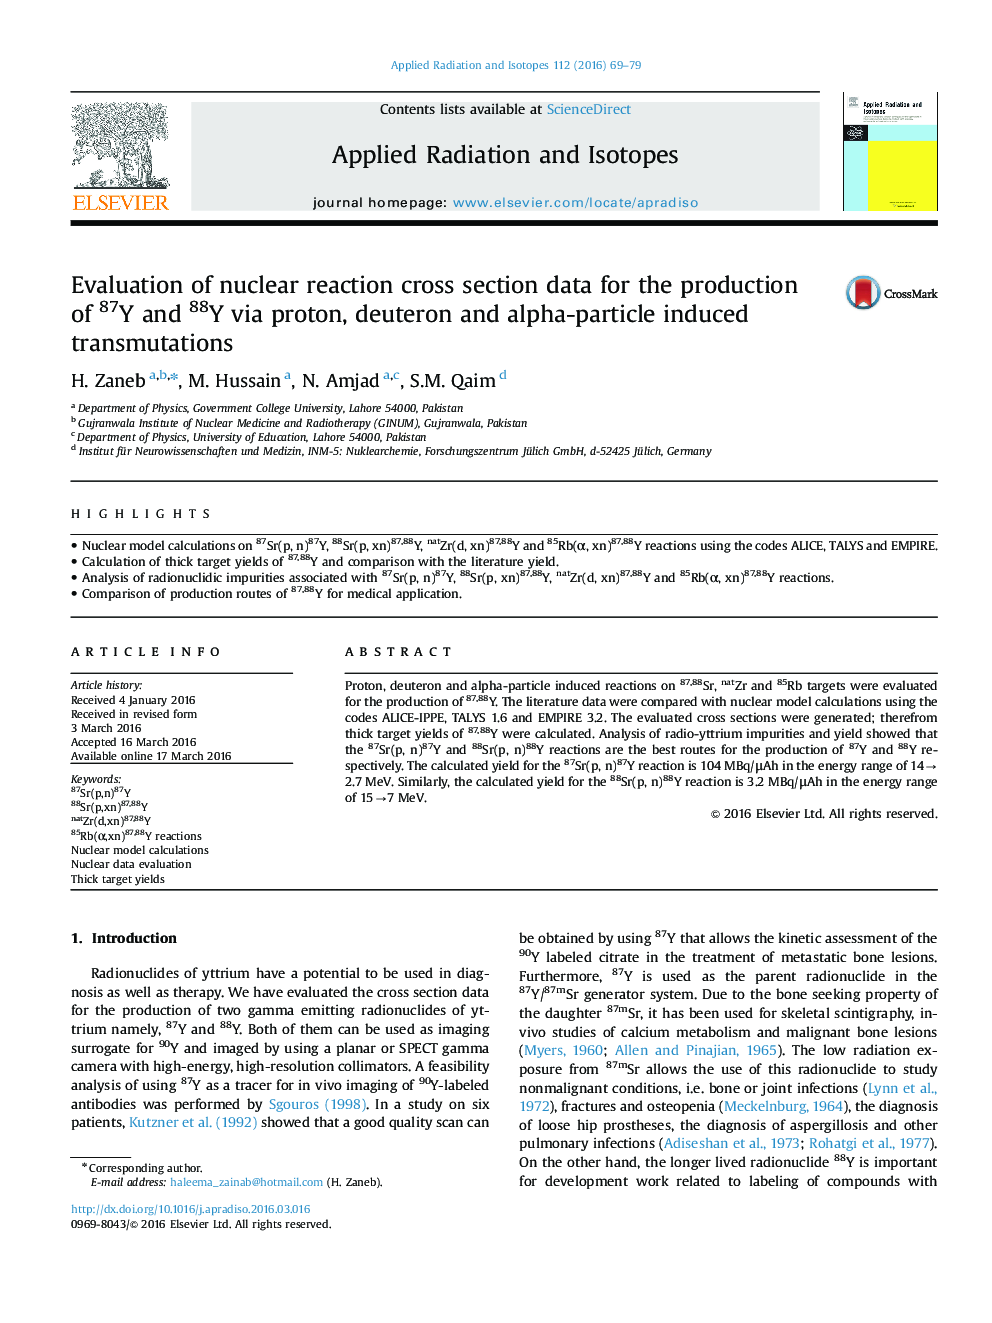 Evaluation of nuclear reaction cross section data for the production of 87Y and 88Y via proton, deuteron and alpha-particle induced transmutations